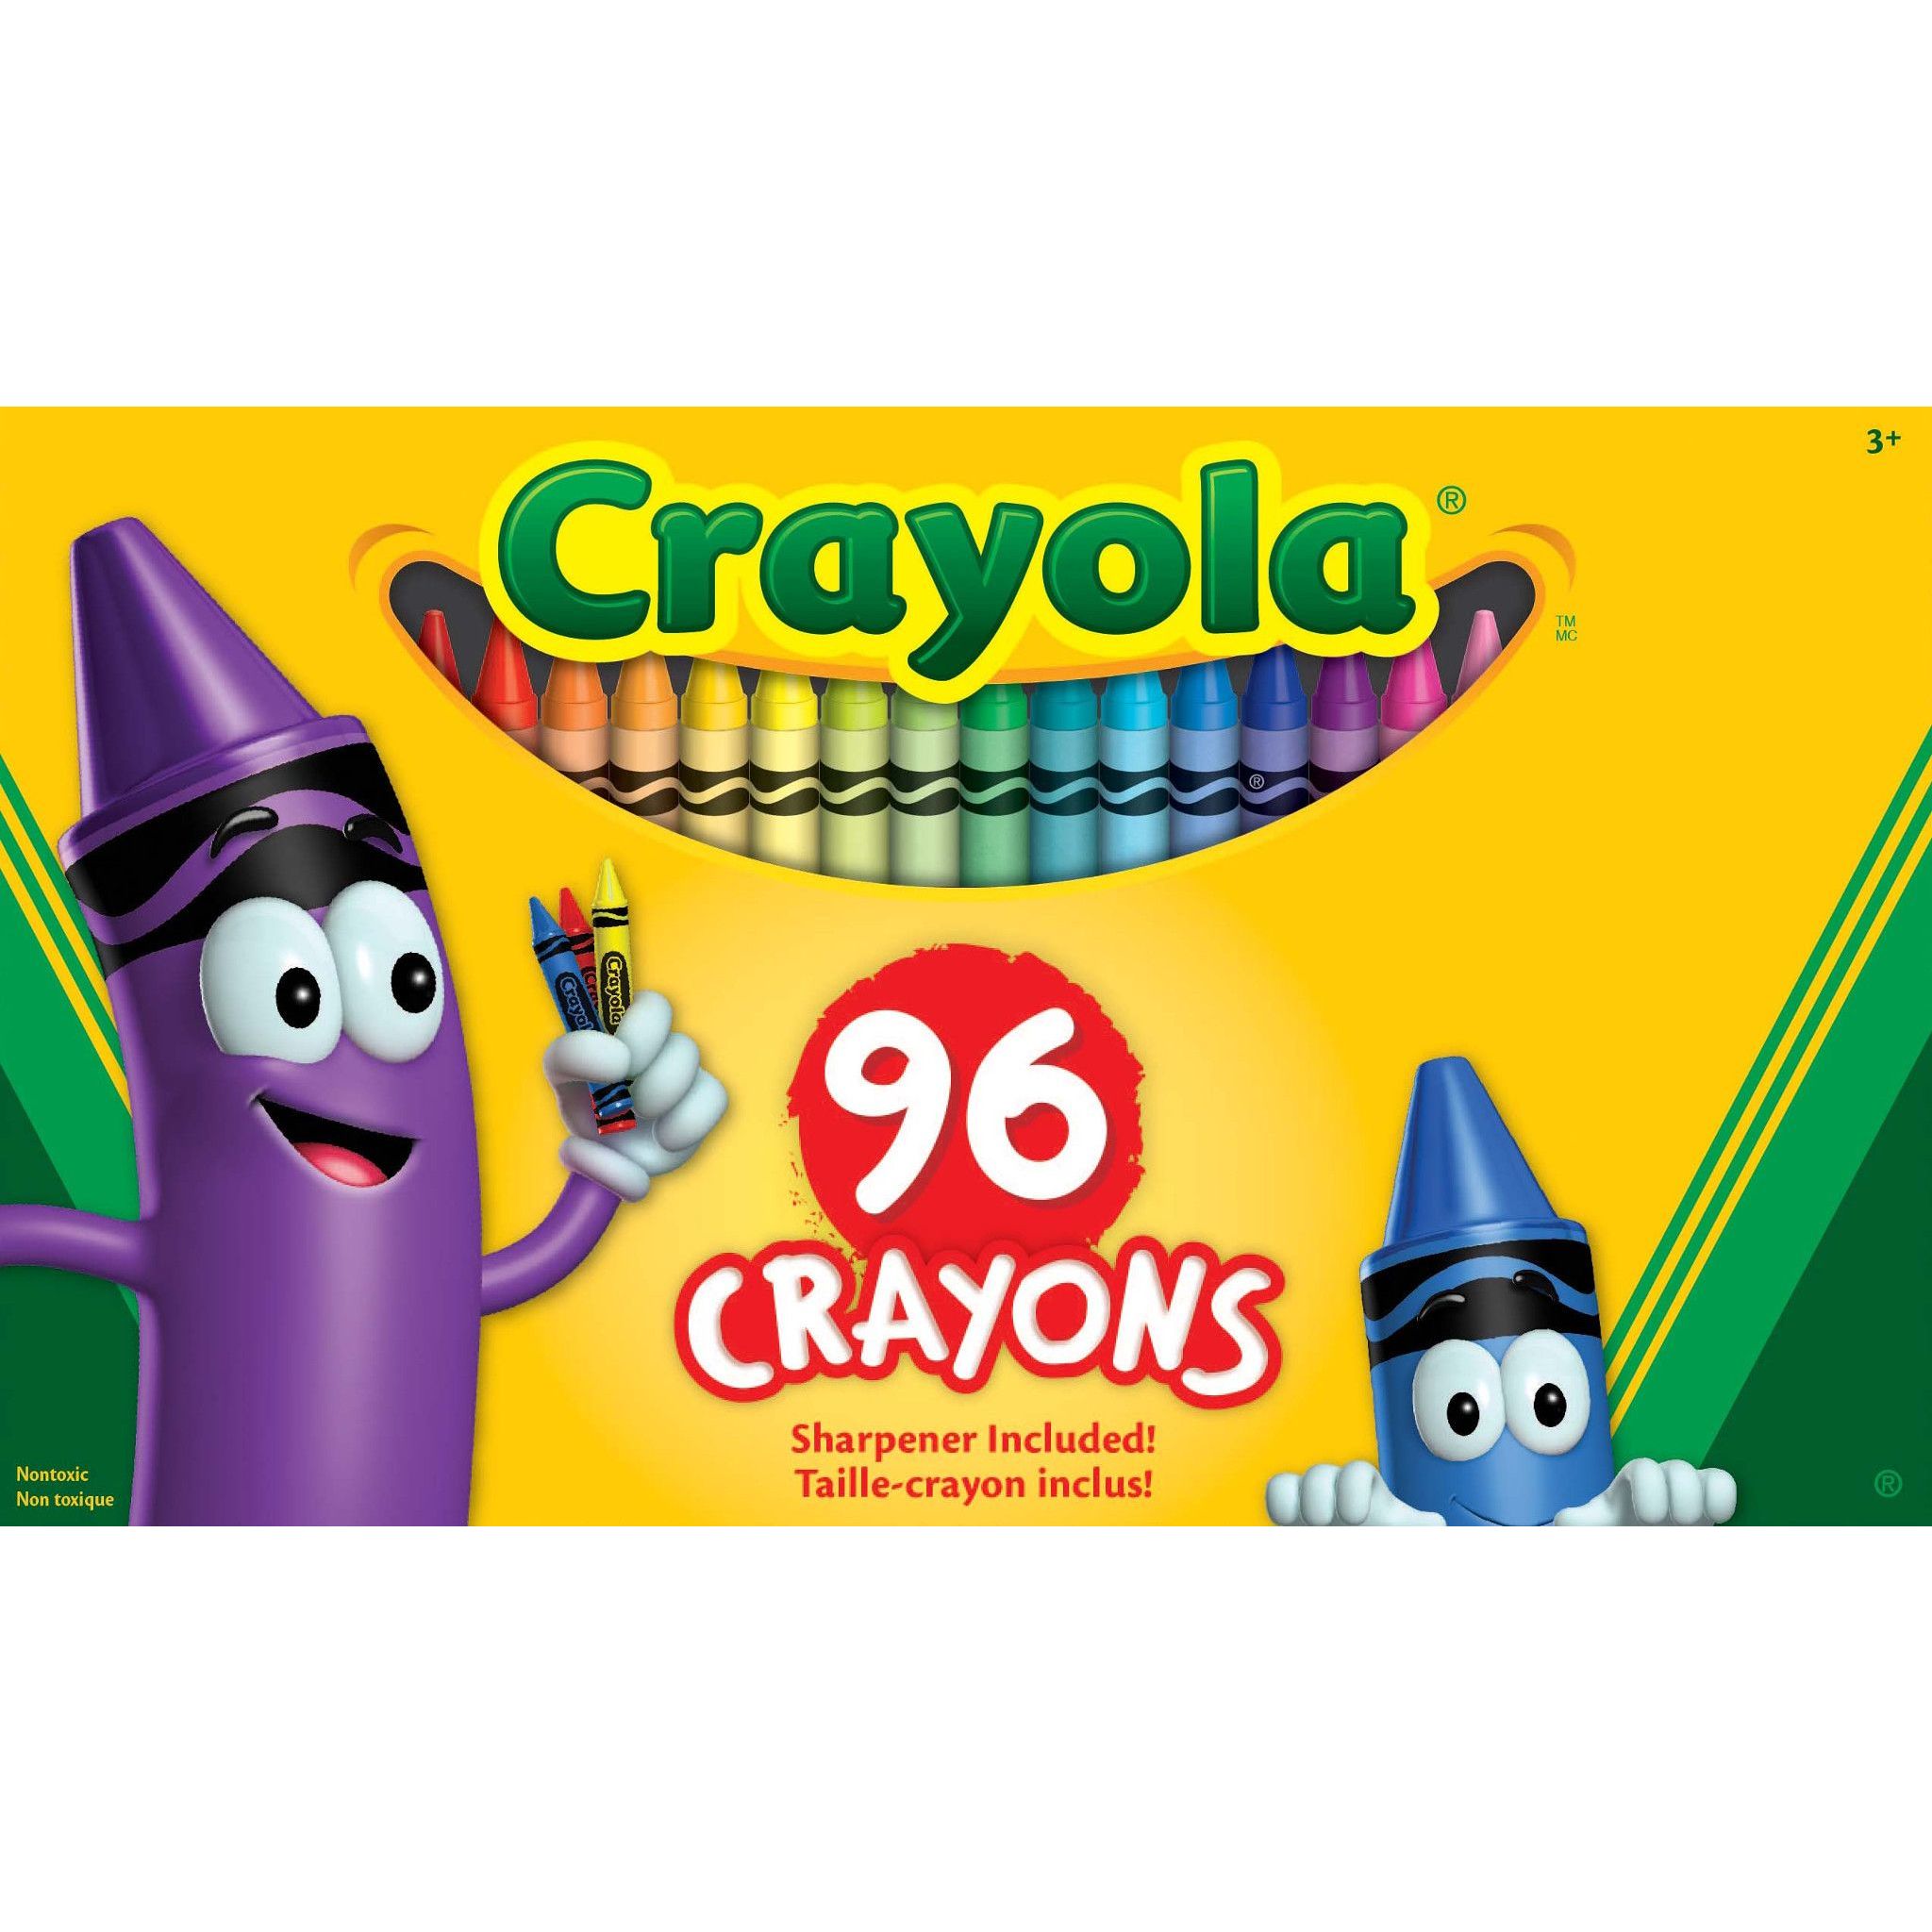 Crayola Crayon Set, 96-Colors, School Supplies, Art Gifts for Kids - image 9 of 12